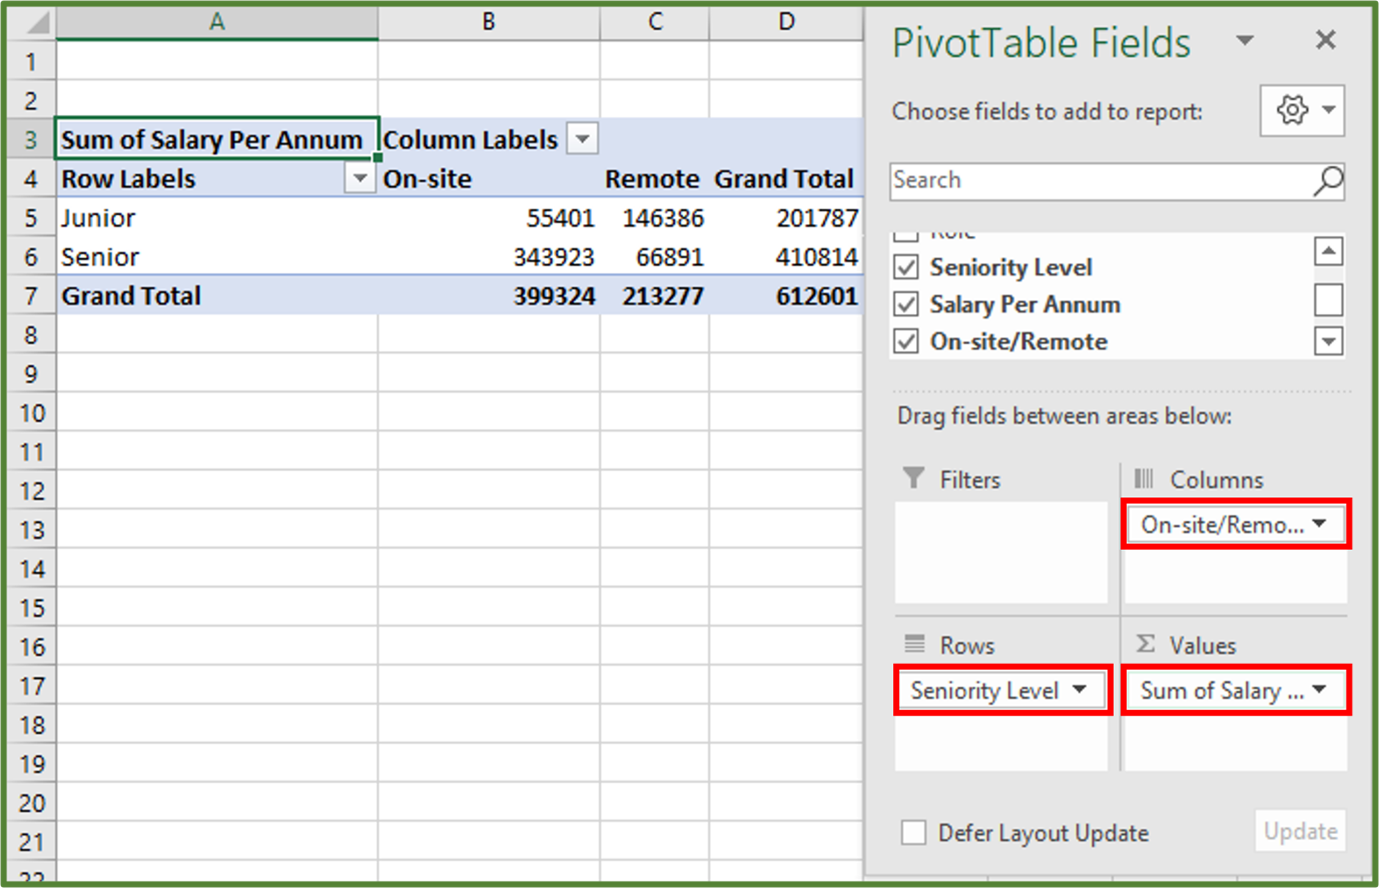 Screenshot of the Pivot Table showing the fields added and highlighted.